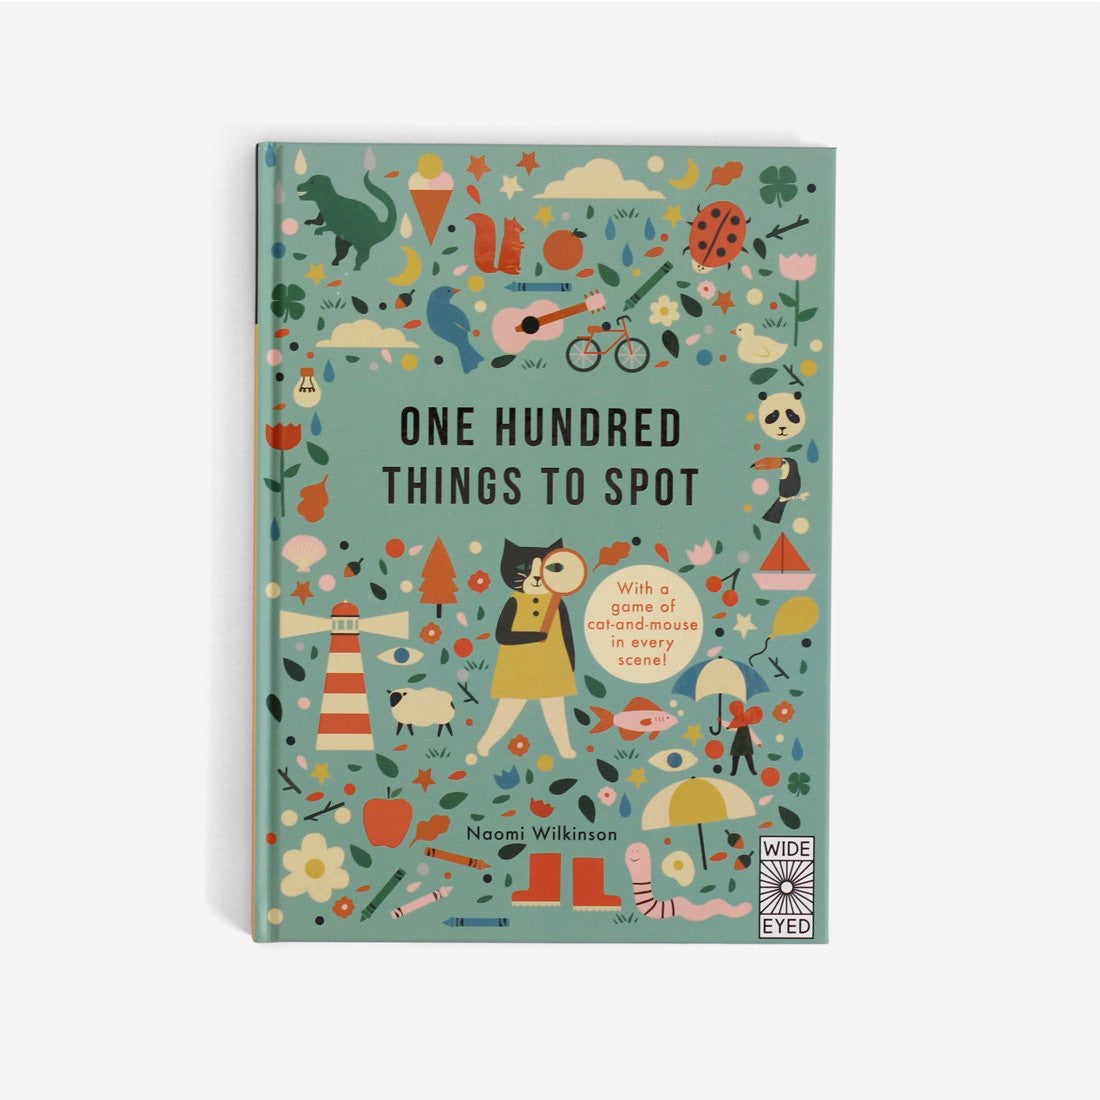 One Hundred Things To Spot by Naomi Wilkinson